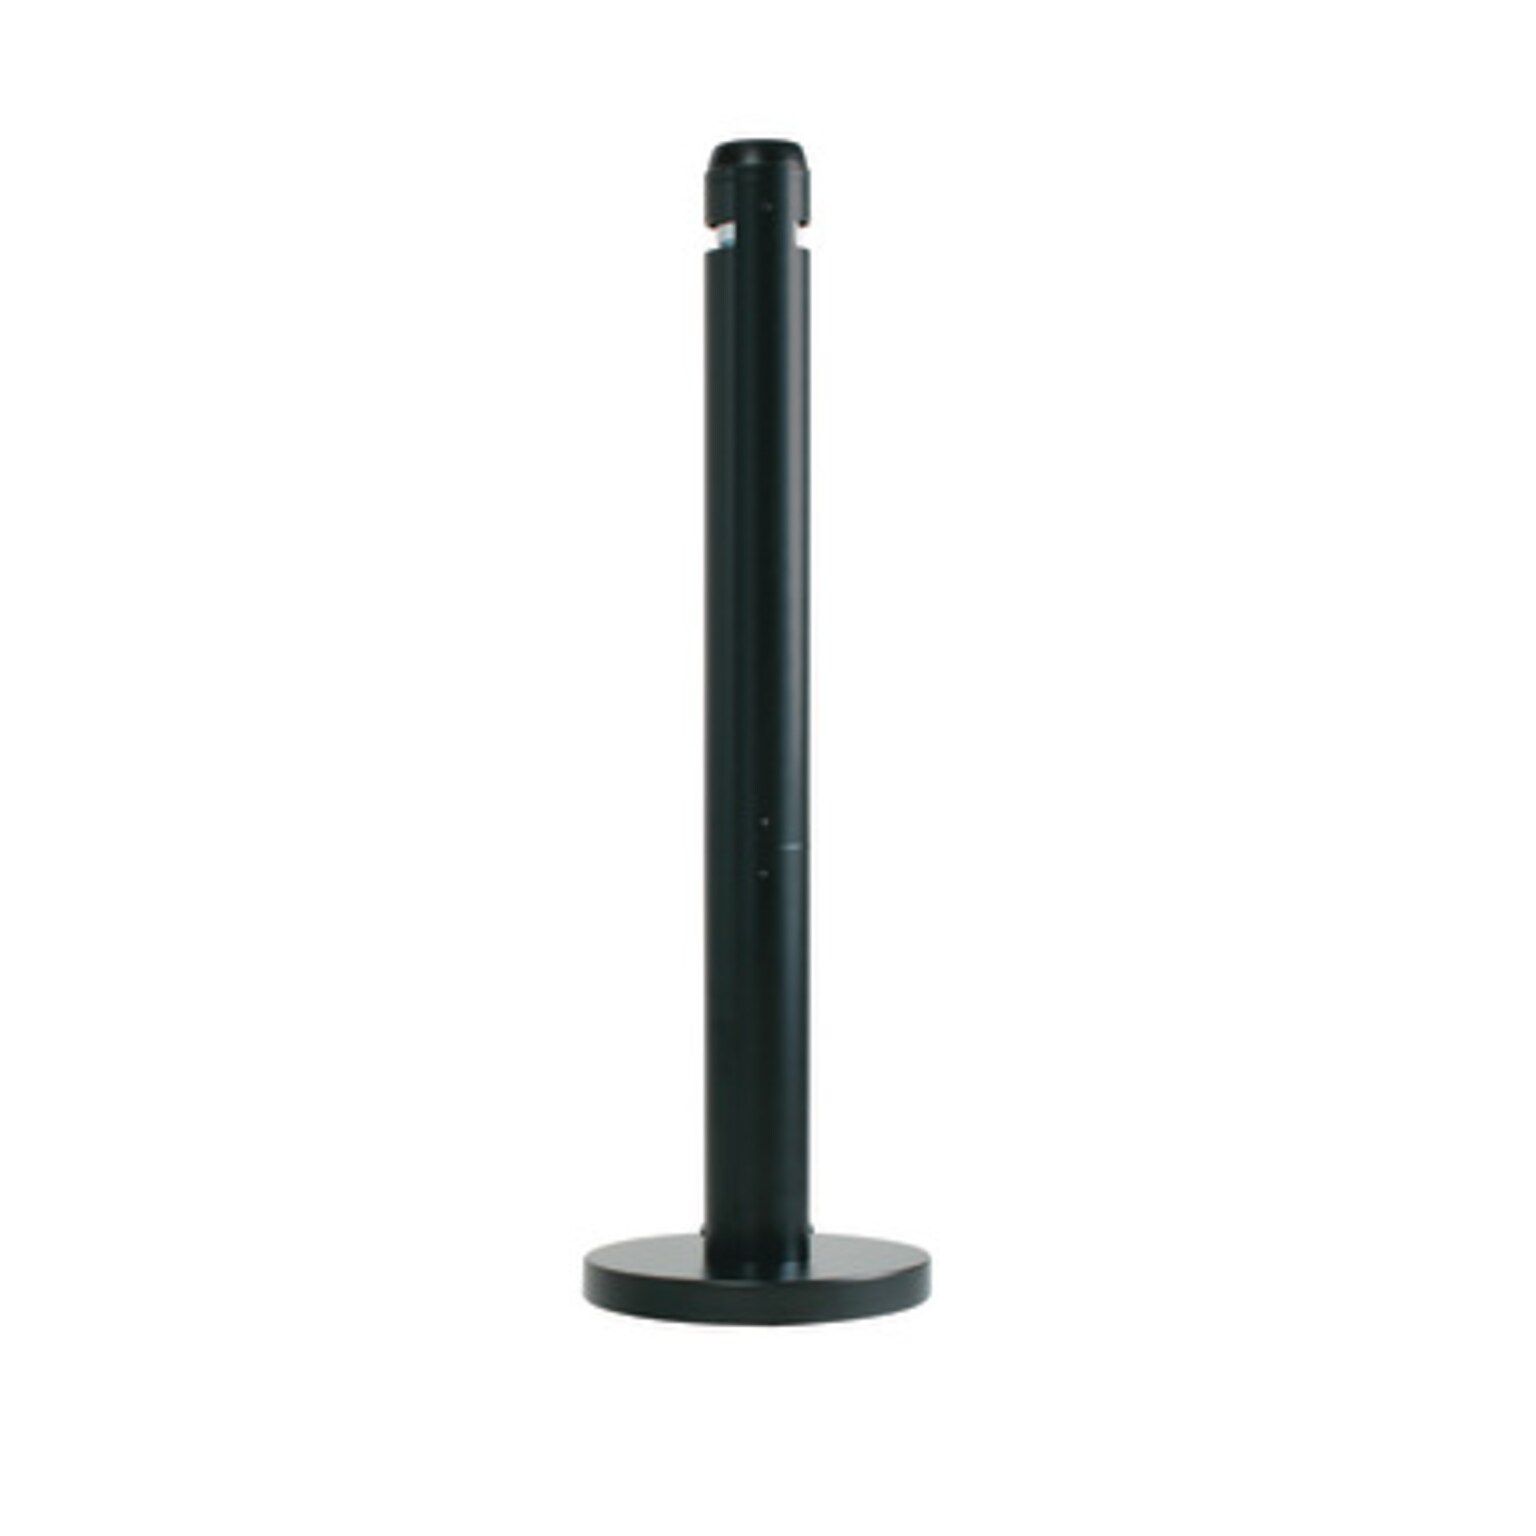 Rubbermaid Smokers Pole Aluminum Trash Can with no Lid, Black, 1.06 Gallon (FGR1BK)